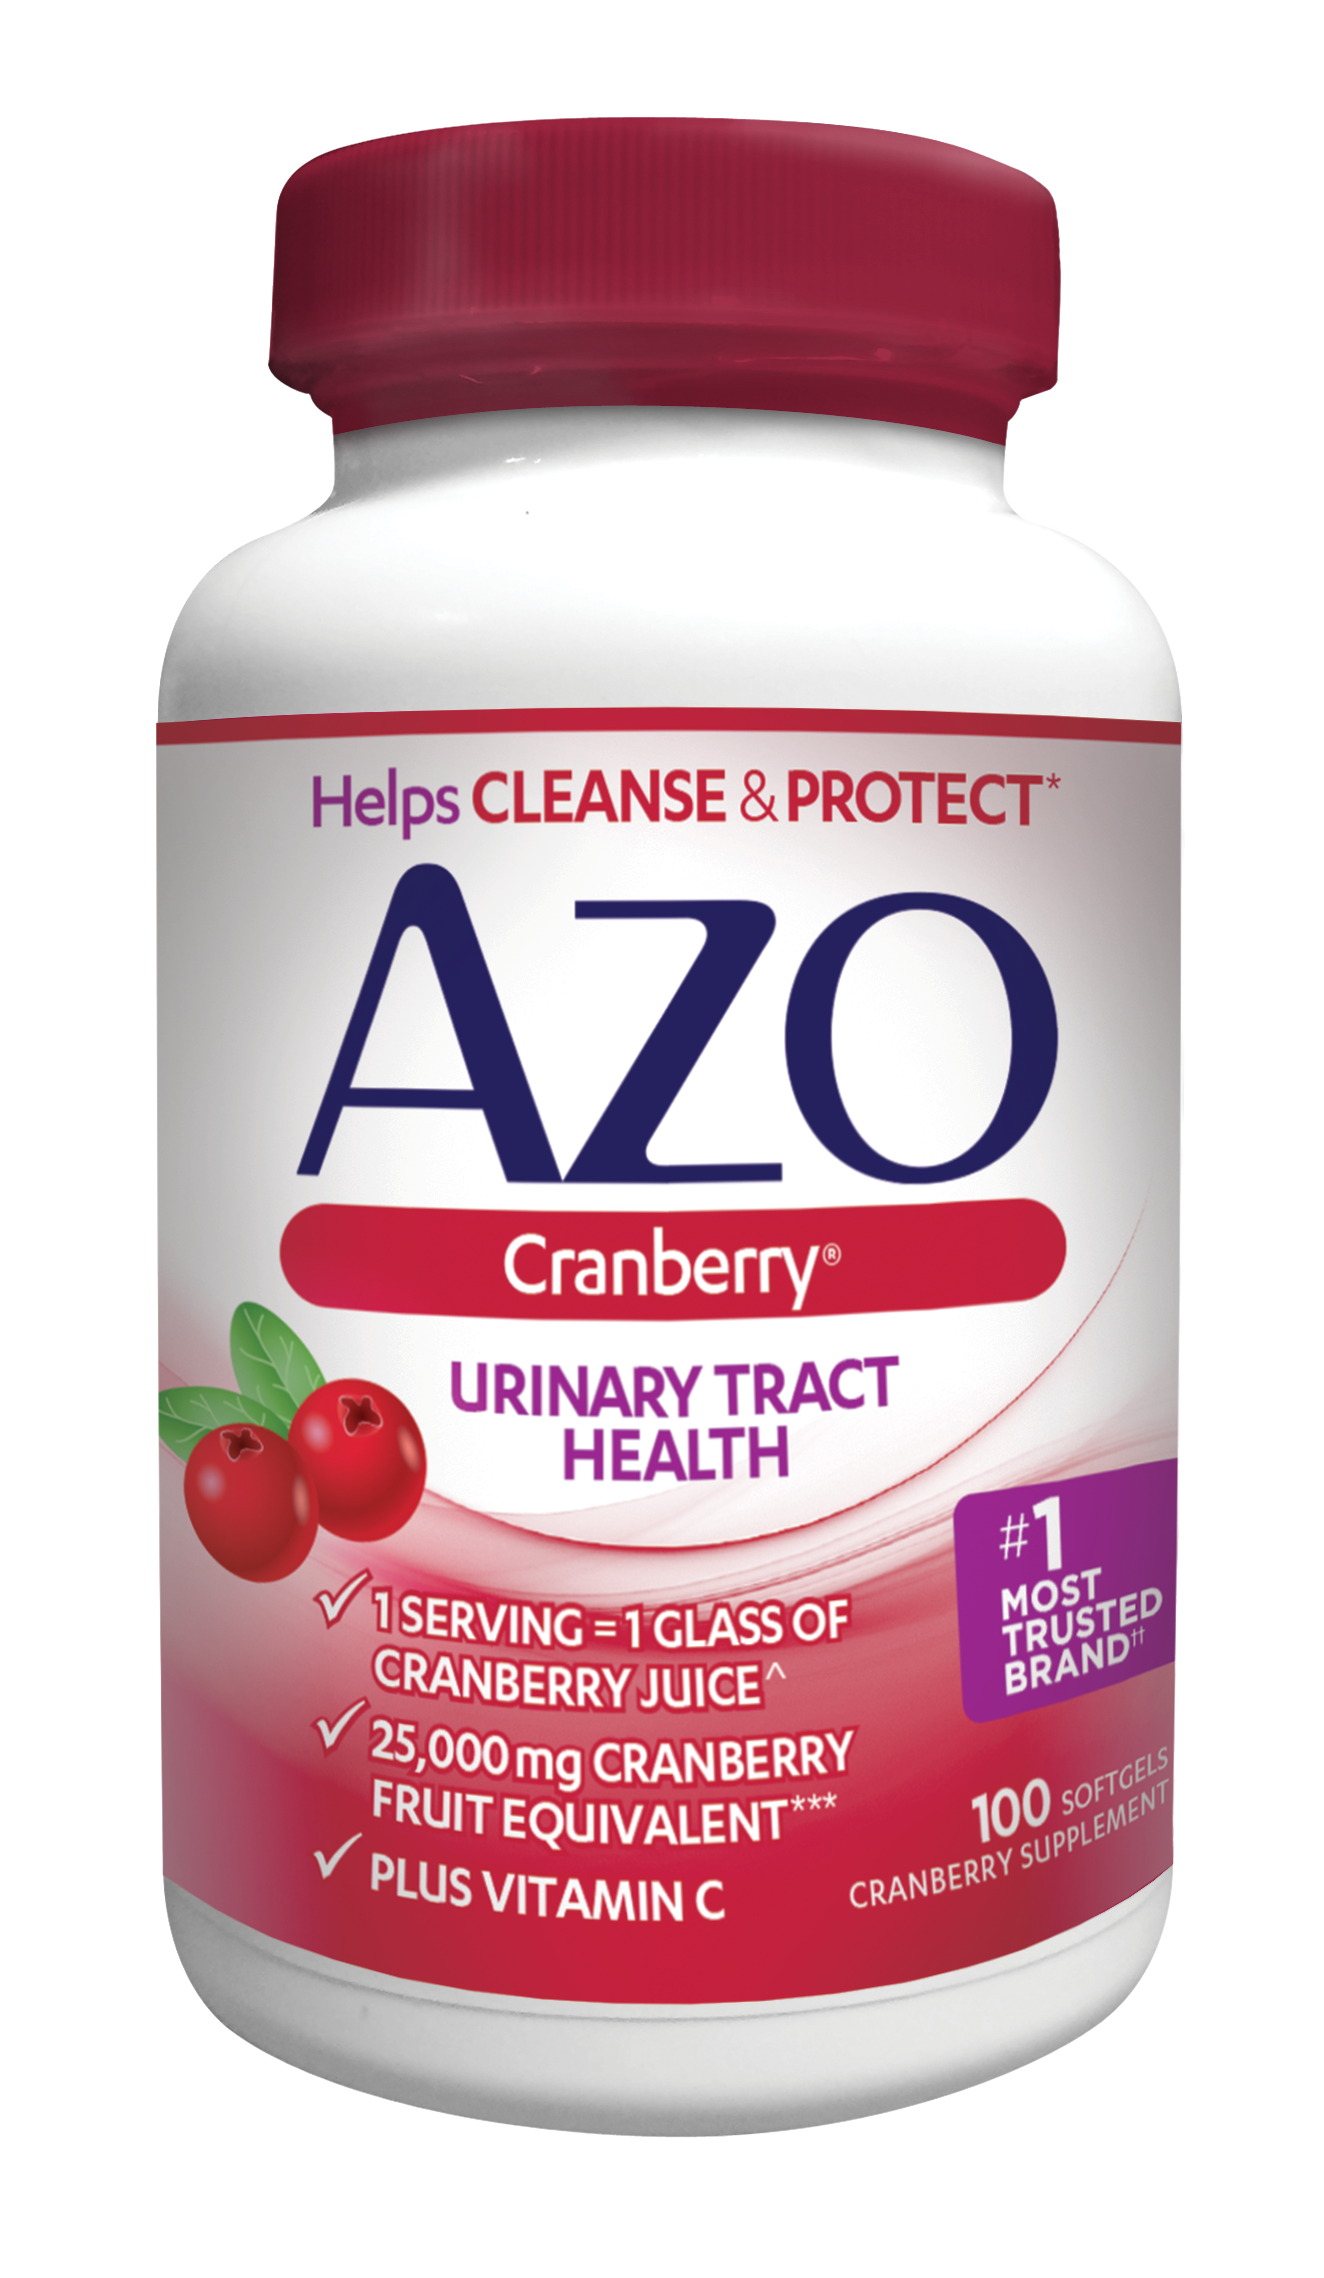 Dislike Cranberry Juice to Ease UTI Fears? Try Our Softgels!